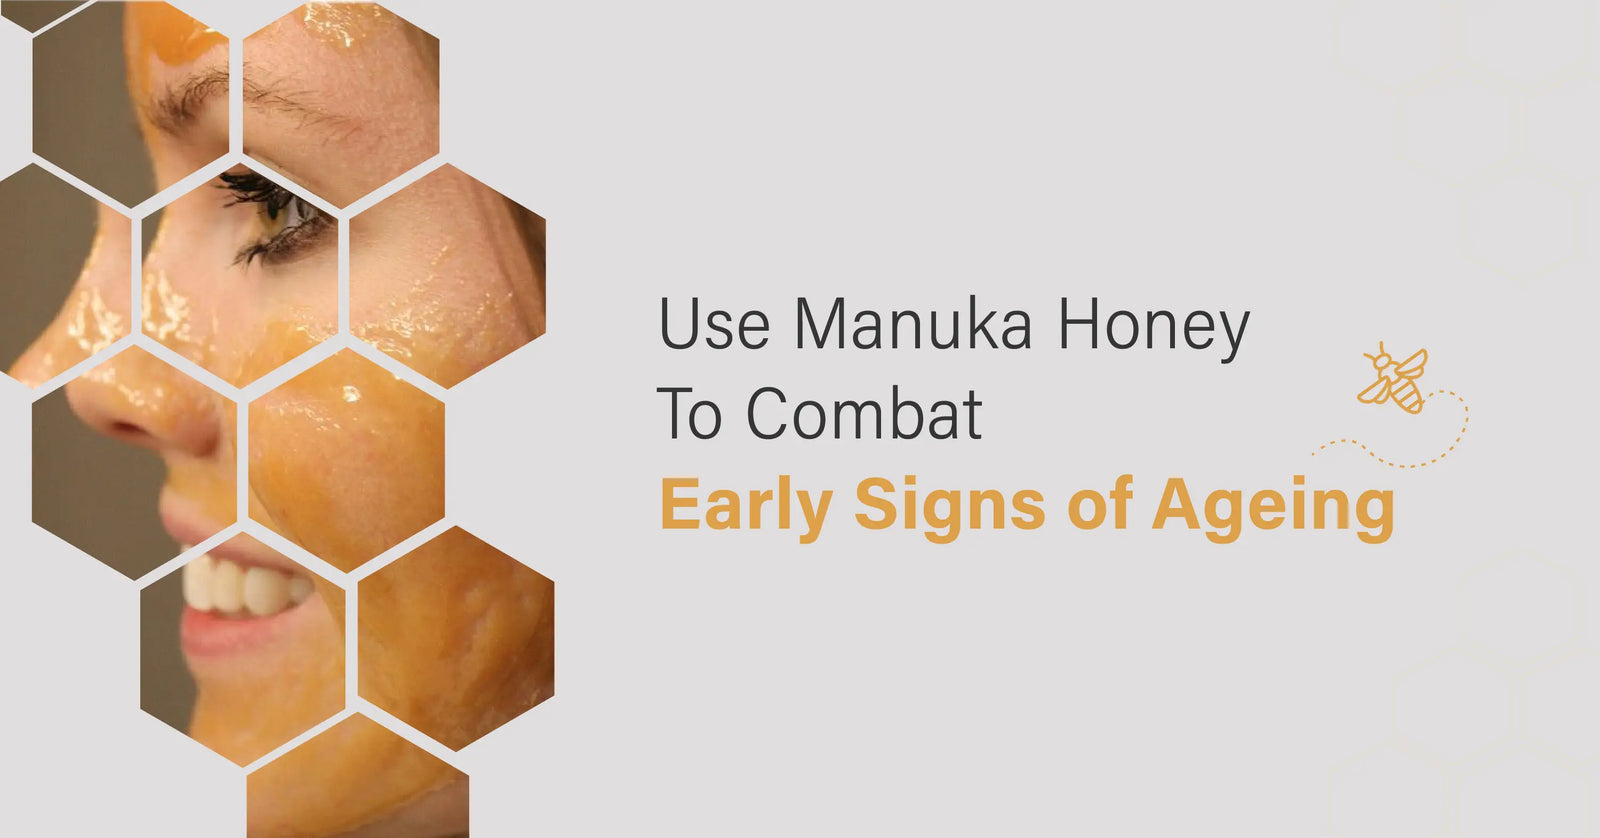 Use Manuka Honey to Combat Early Signs of Ageing